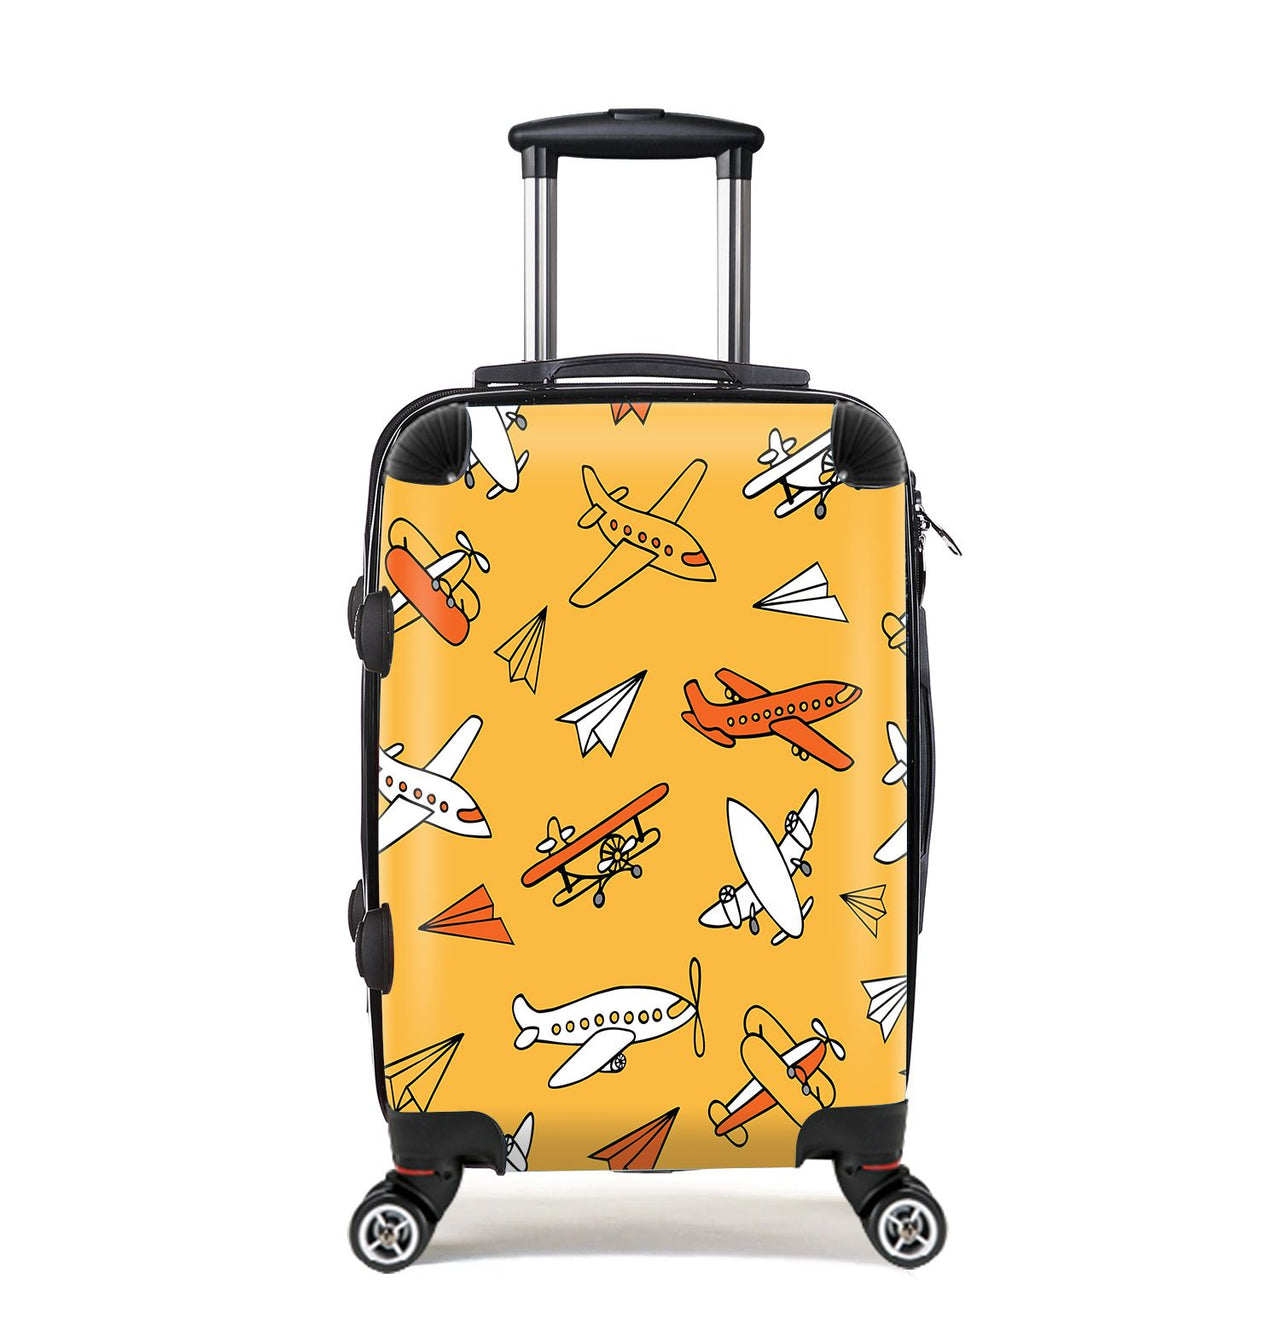 Super Drawings of Airplanes Designed Cabin Size Luggages